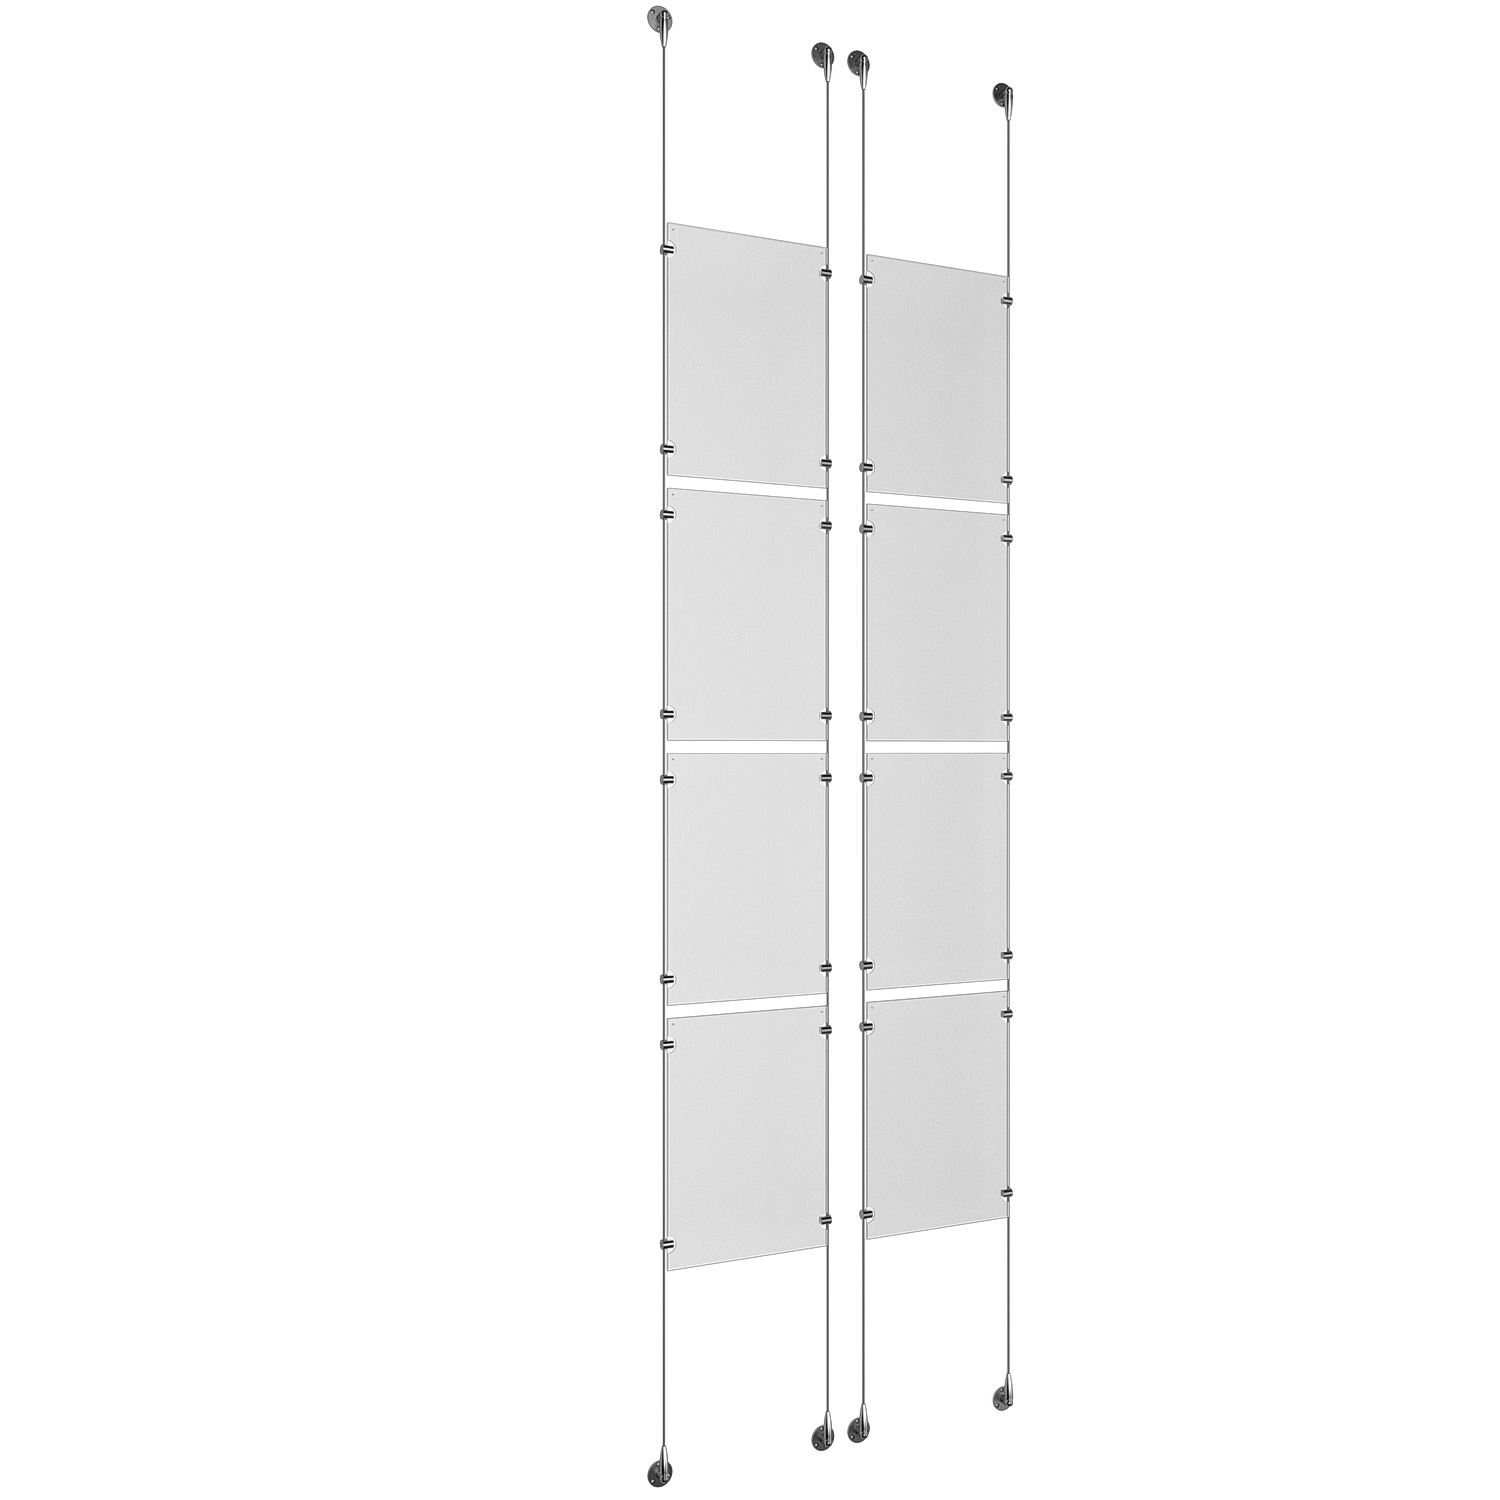 (8) 11'' Width x 17'' Height Clear Acrylic Frame & (4) Stainless Steel Satin Brushed Adjustable Angle Signature 1/8'' Cable Systems with (32) Single-Sided Panel Grippers